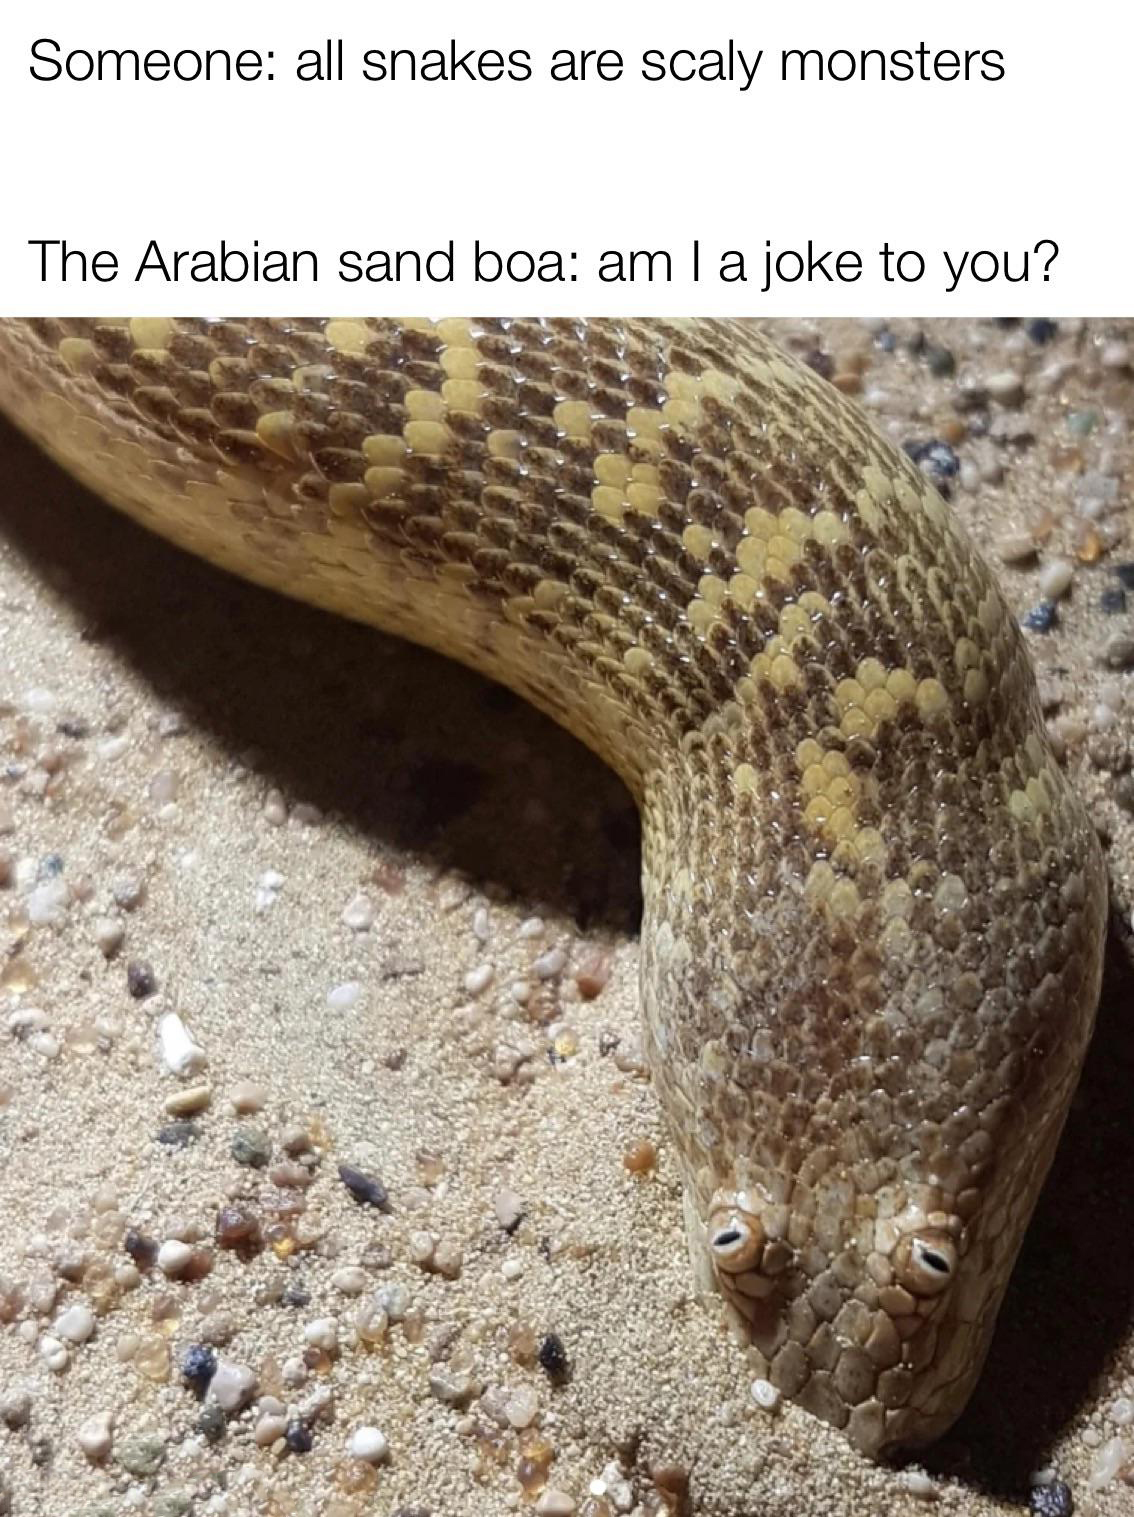 funny memes and pcis - fauna - Someone all snakes are scaly monsters The Arabian sand boa am I a joke to you?